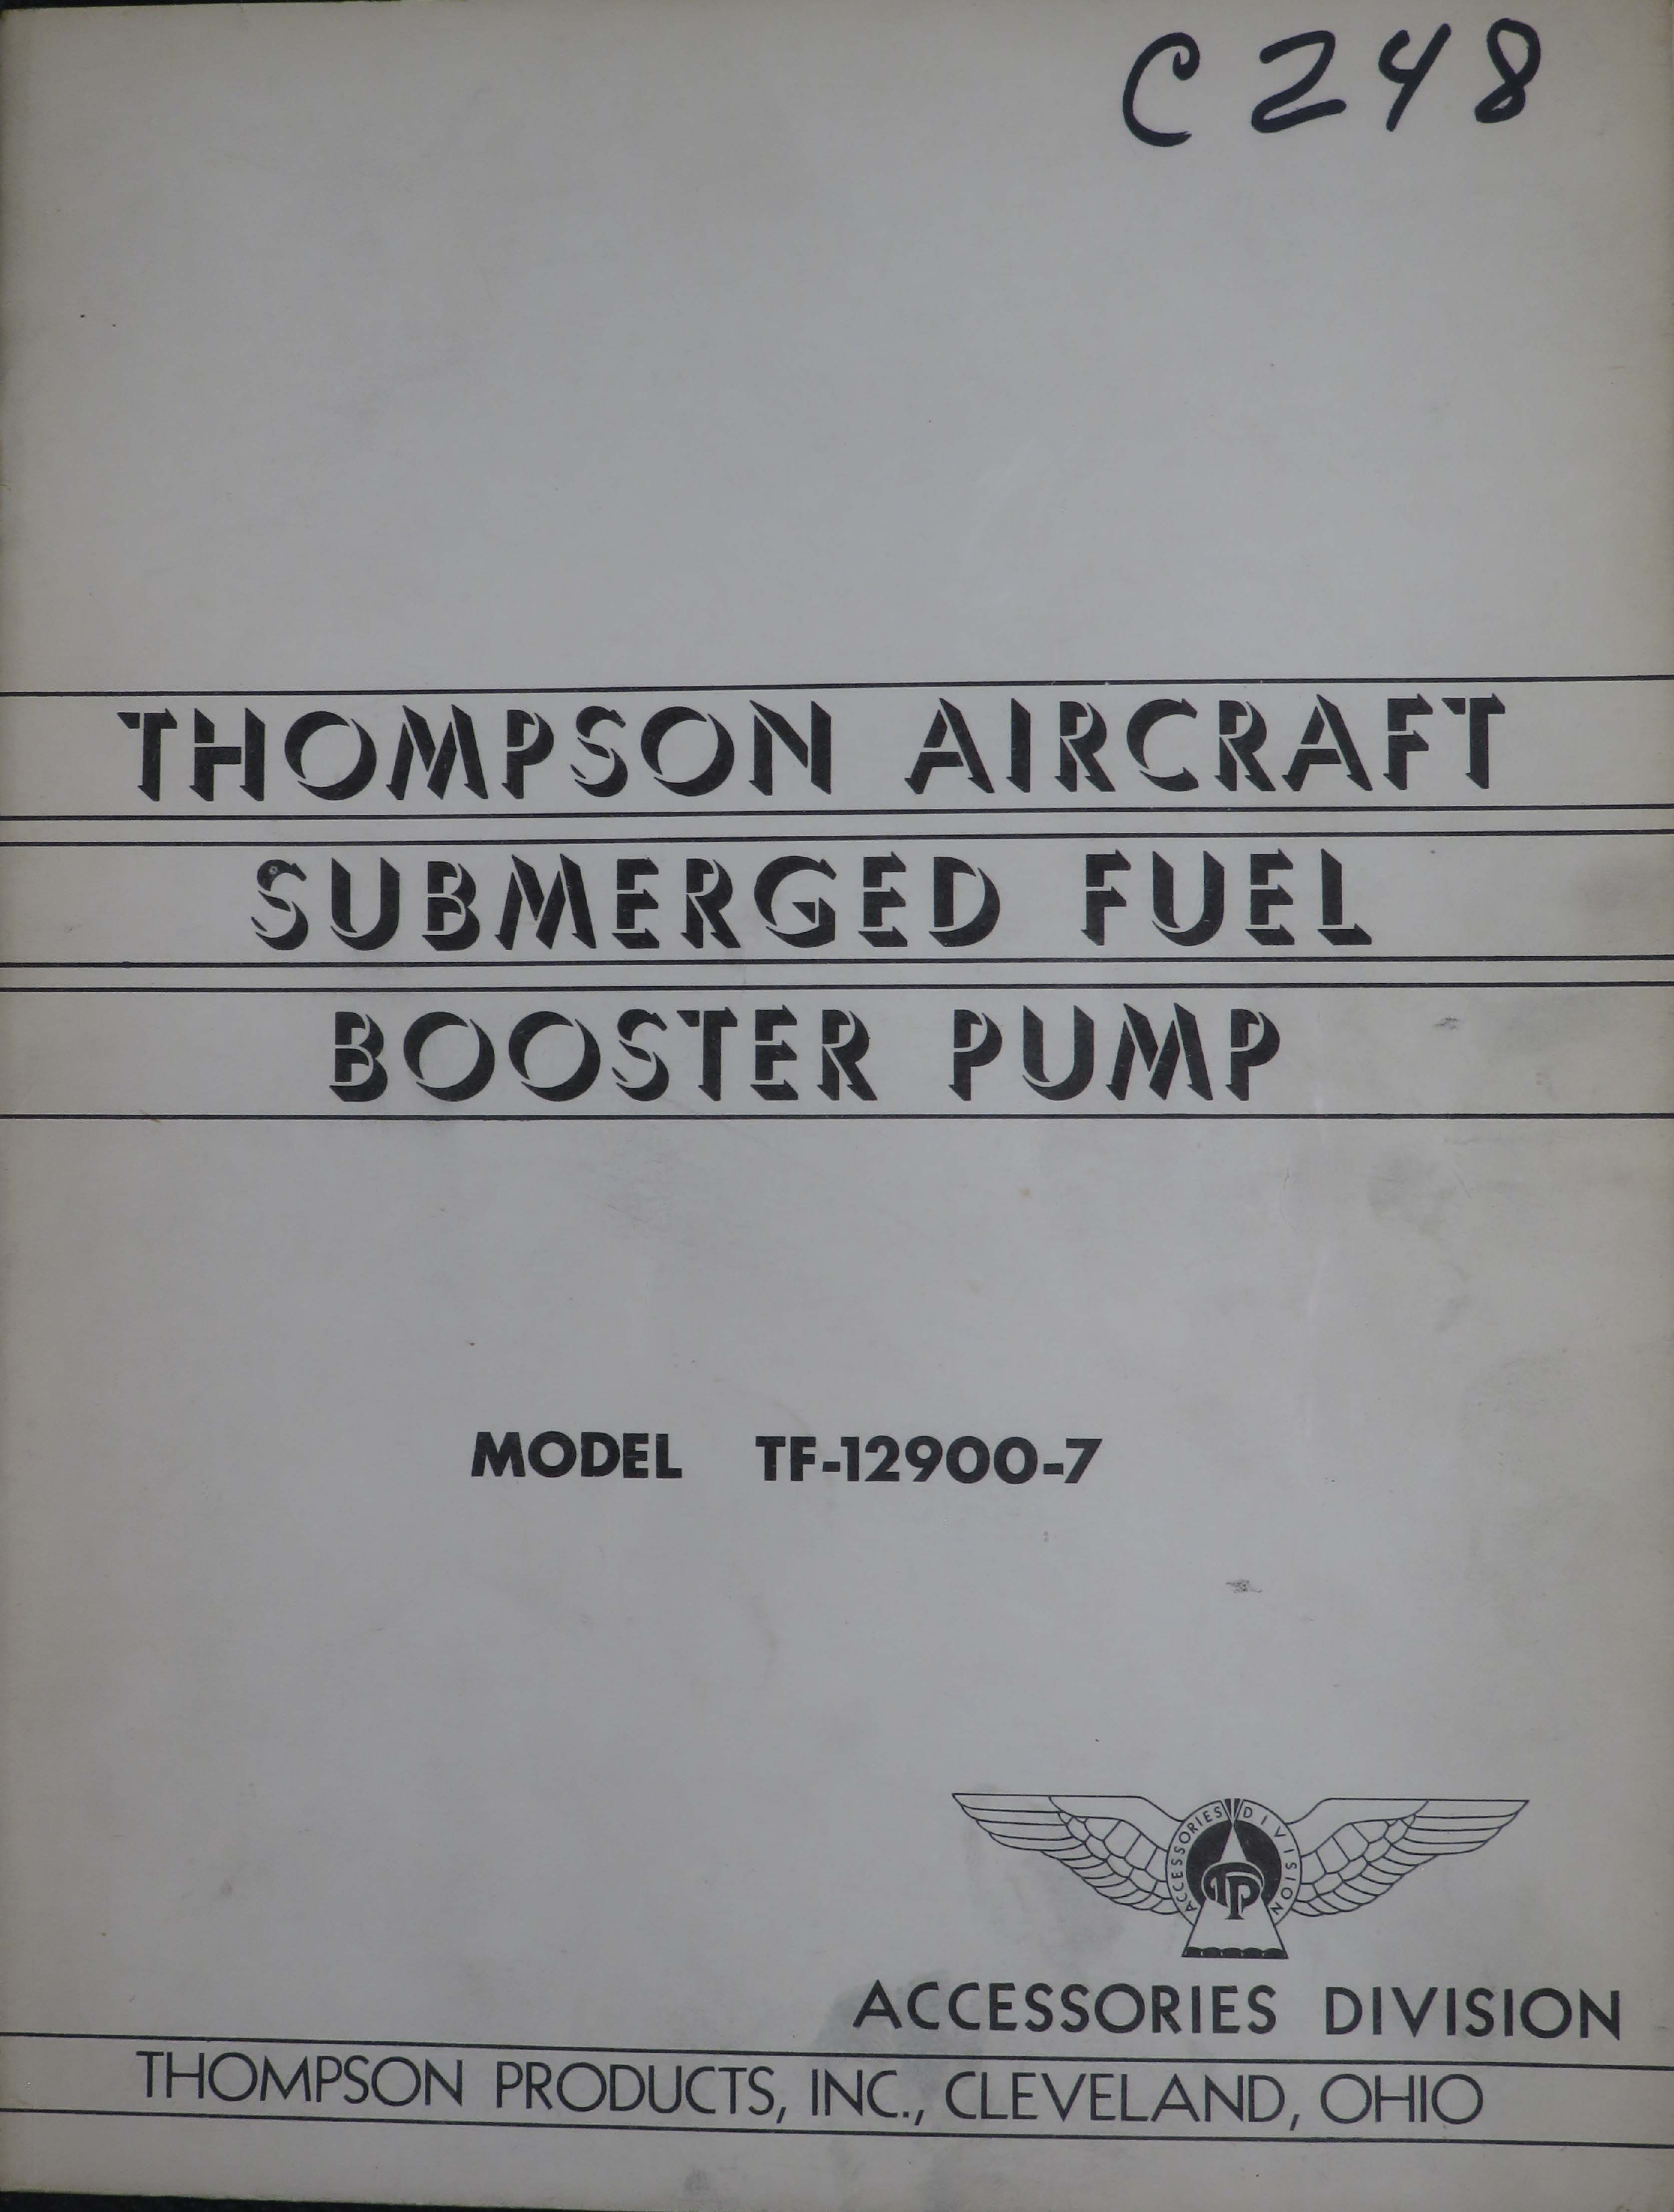 Sample page 1 from AirCorps Library document: Thompson Aircraft Submerged Fuel Booster Pump - Model TF-12900-7